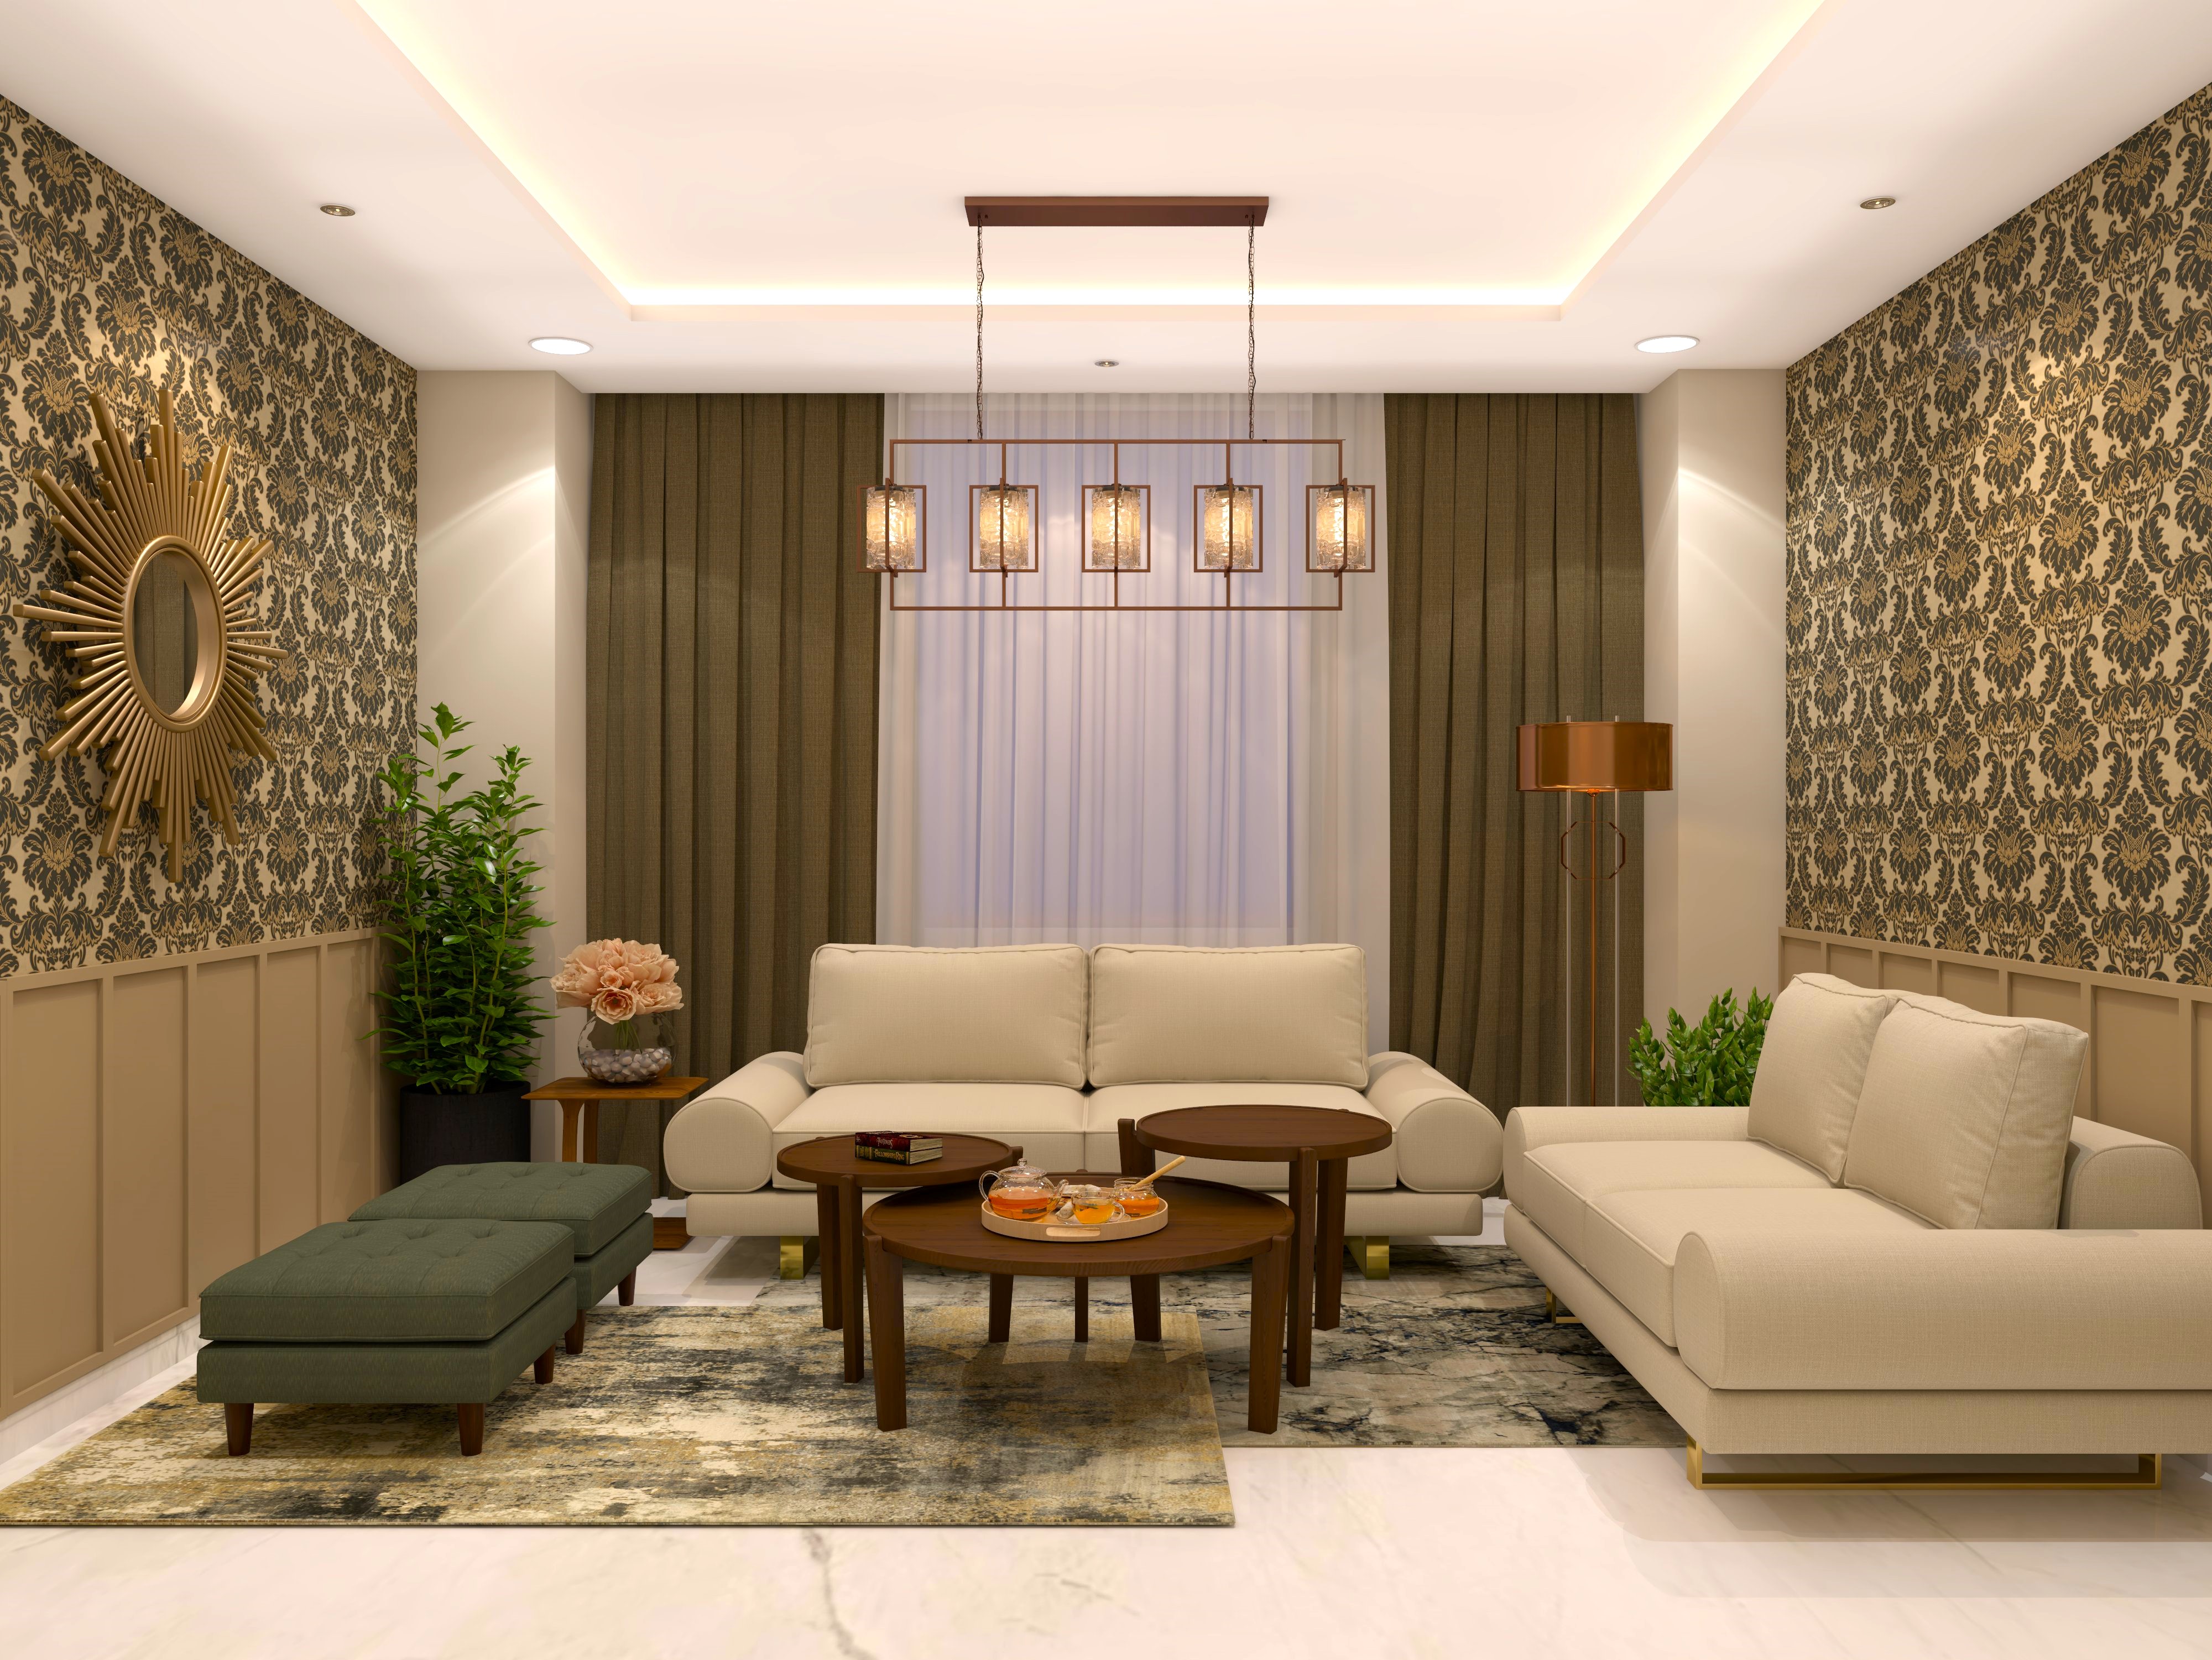 Cream and brown living room with traditional wallpaper having gold accents-Beautiful Homes